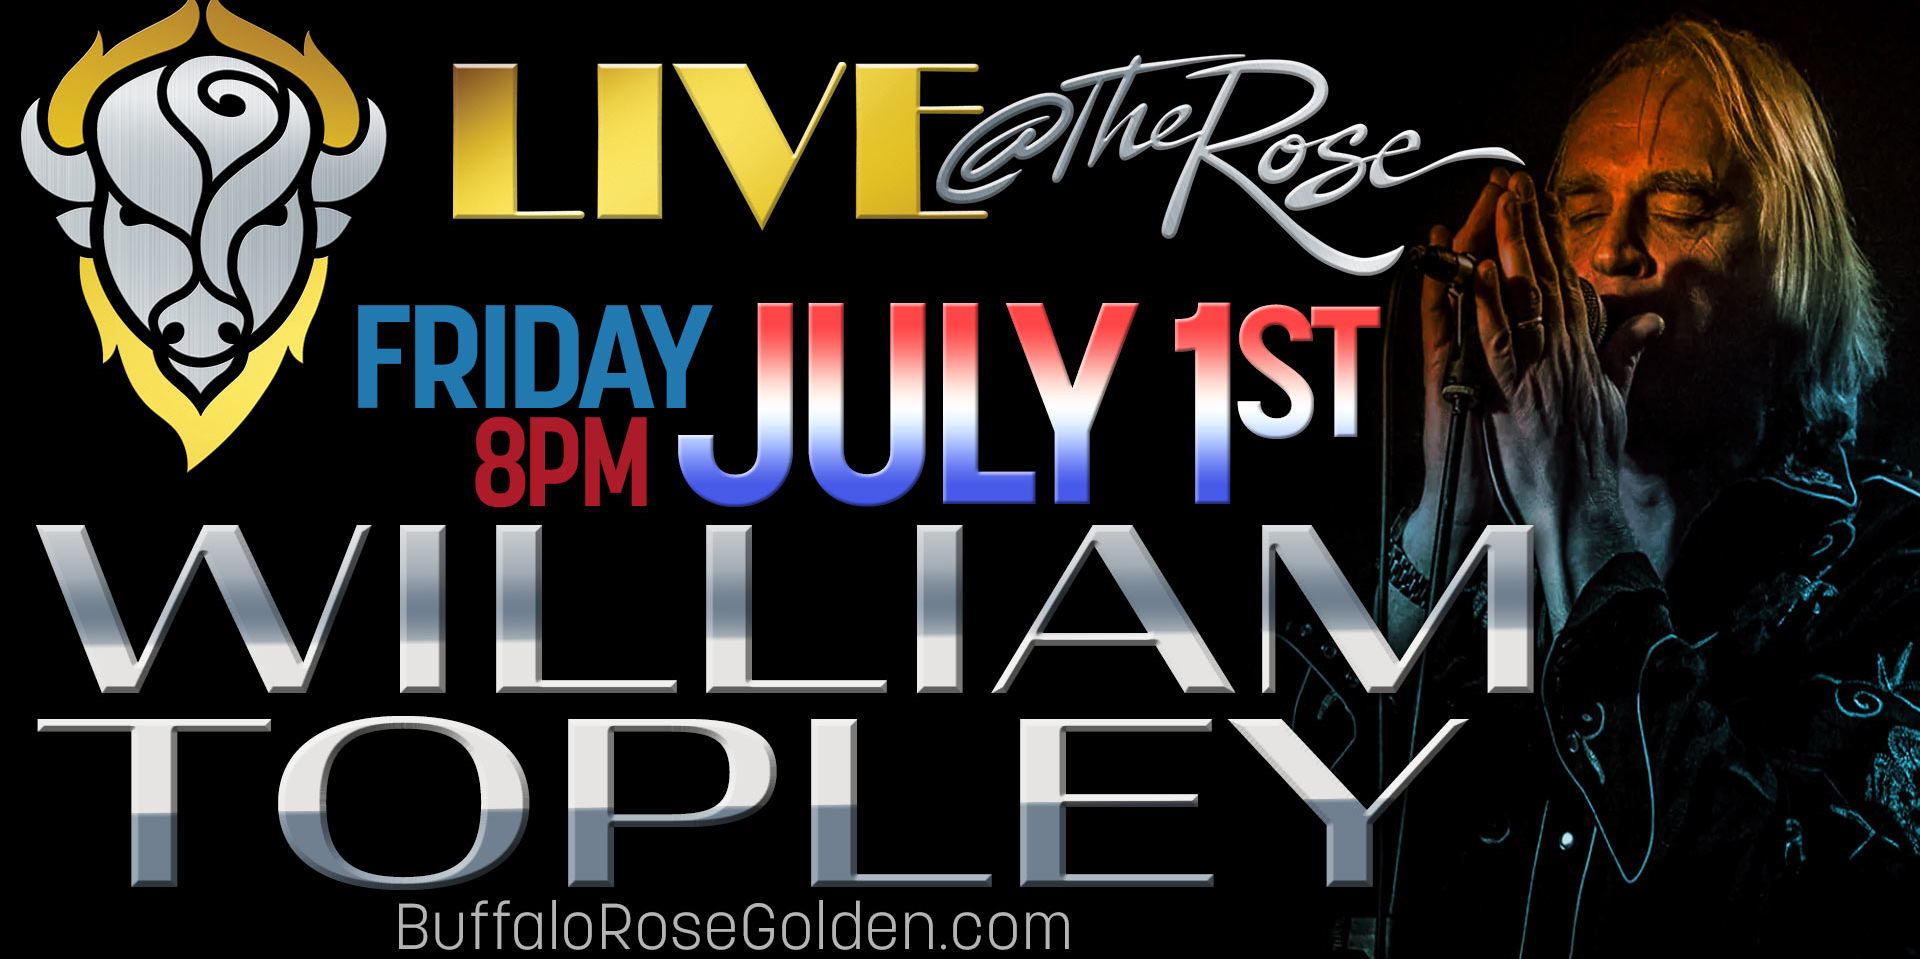 Live @ The Rose - William Topley promotional image